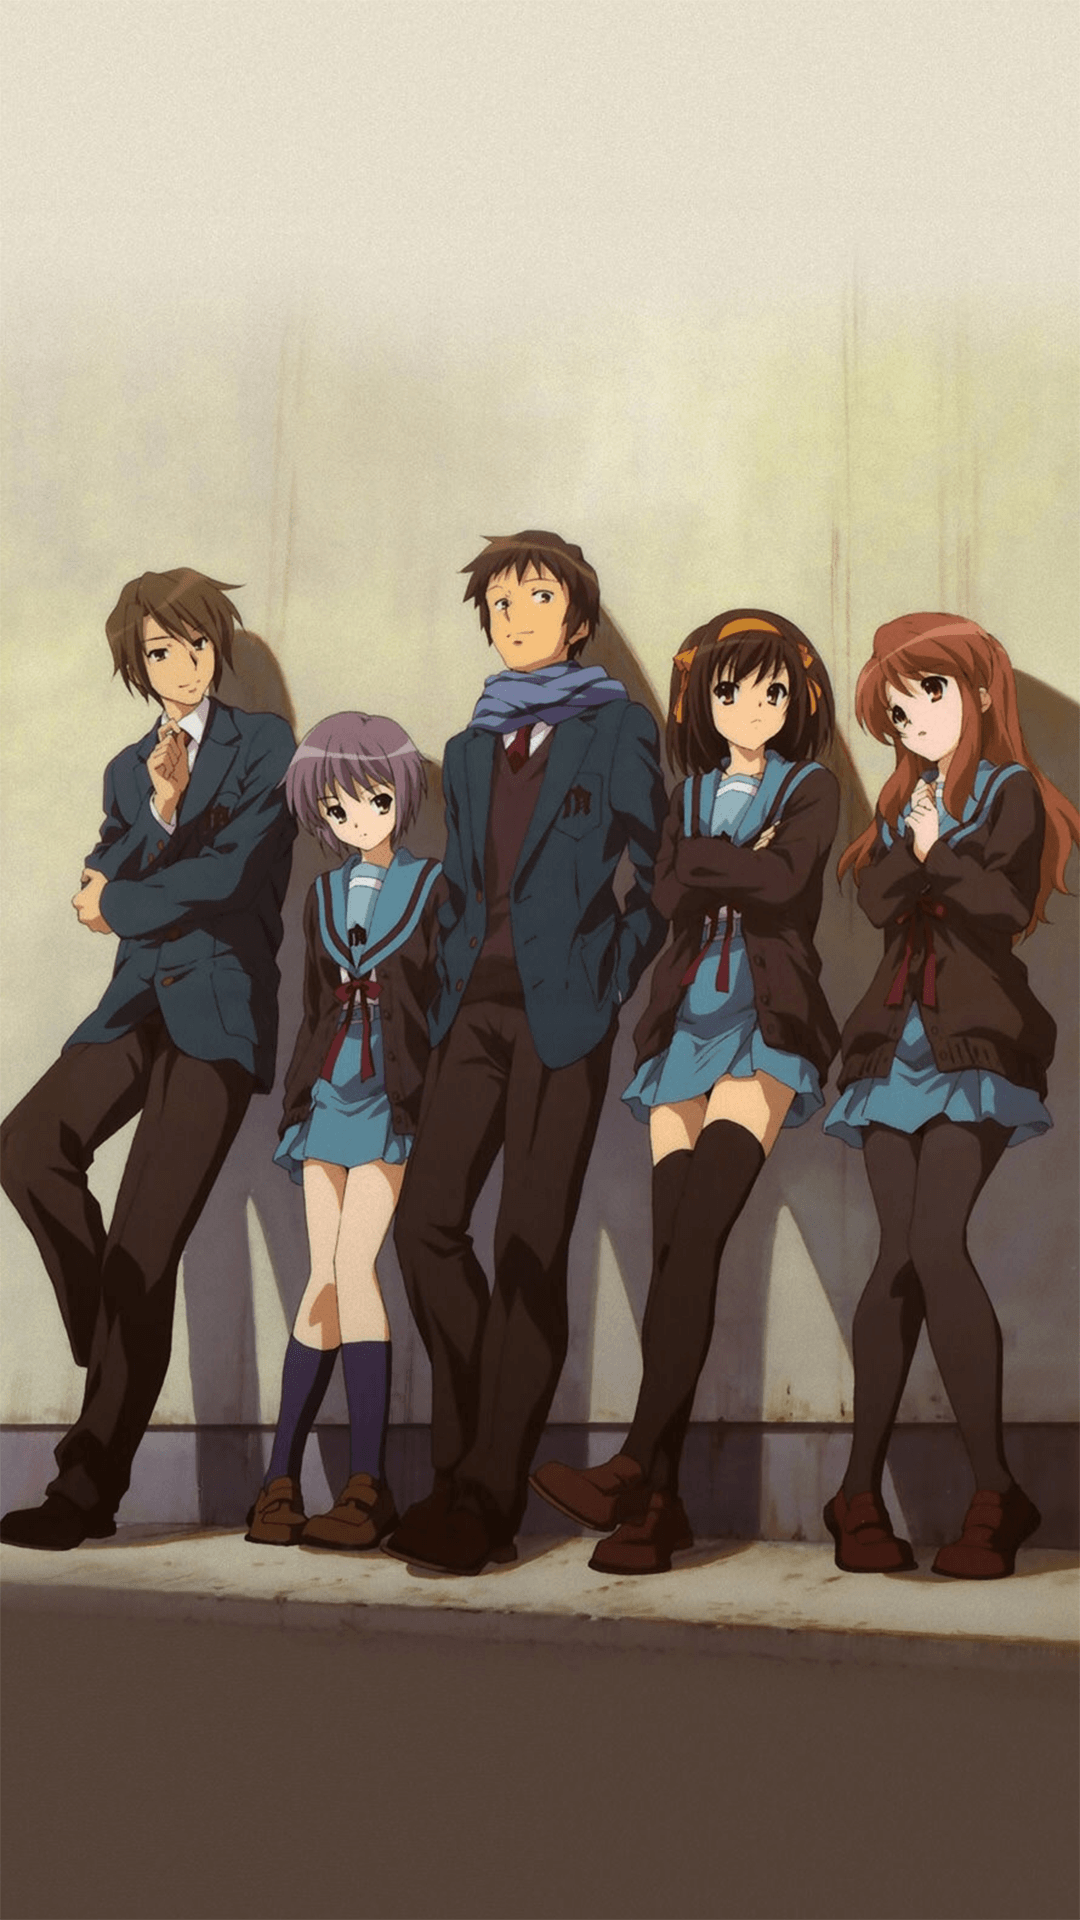 The Disappearance Of Haruhi Suzumiya Wallpapers - Wallpaper Cave